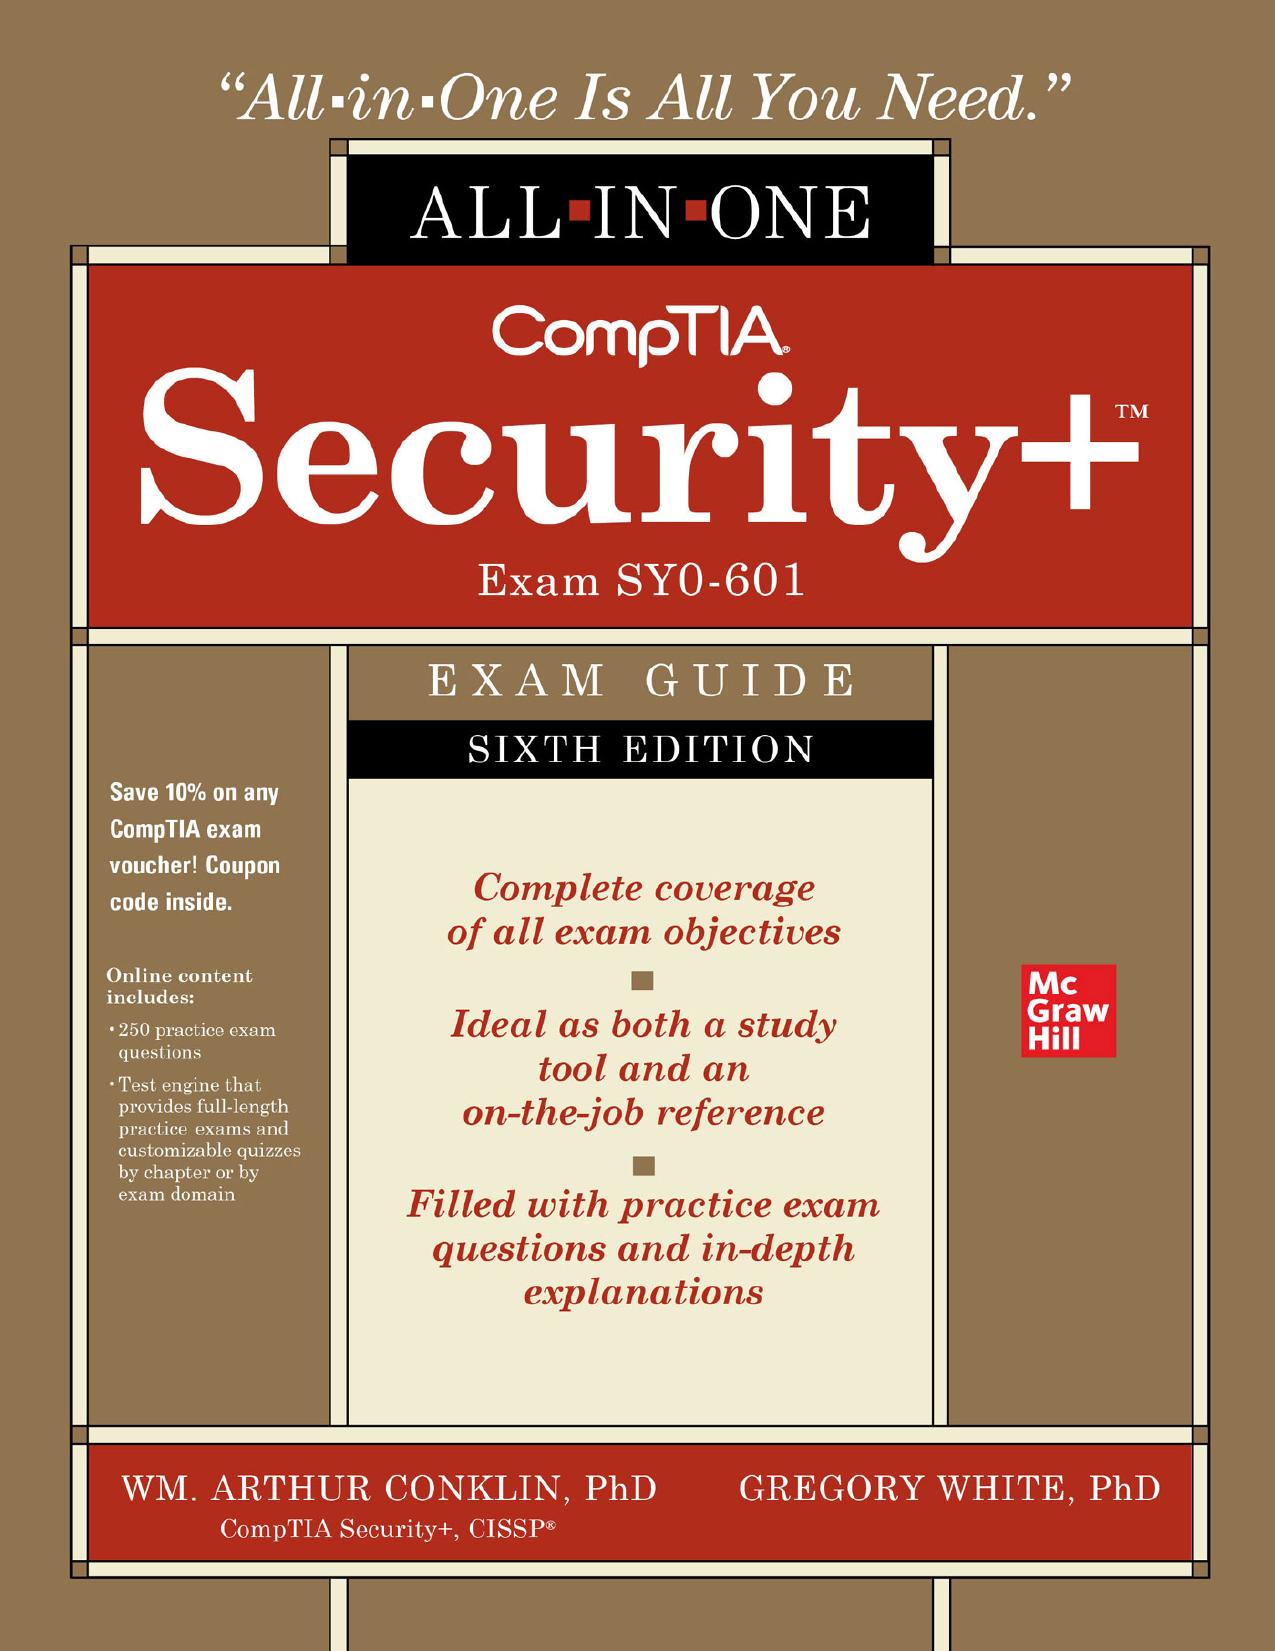 CompTIA Security+ All-In-One Exam Guide, Sixth Edition (Exam SY0-601)